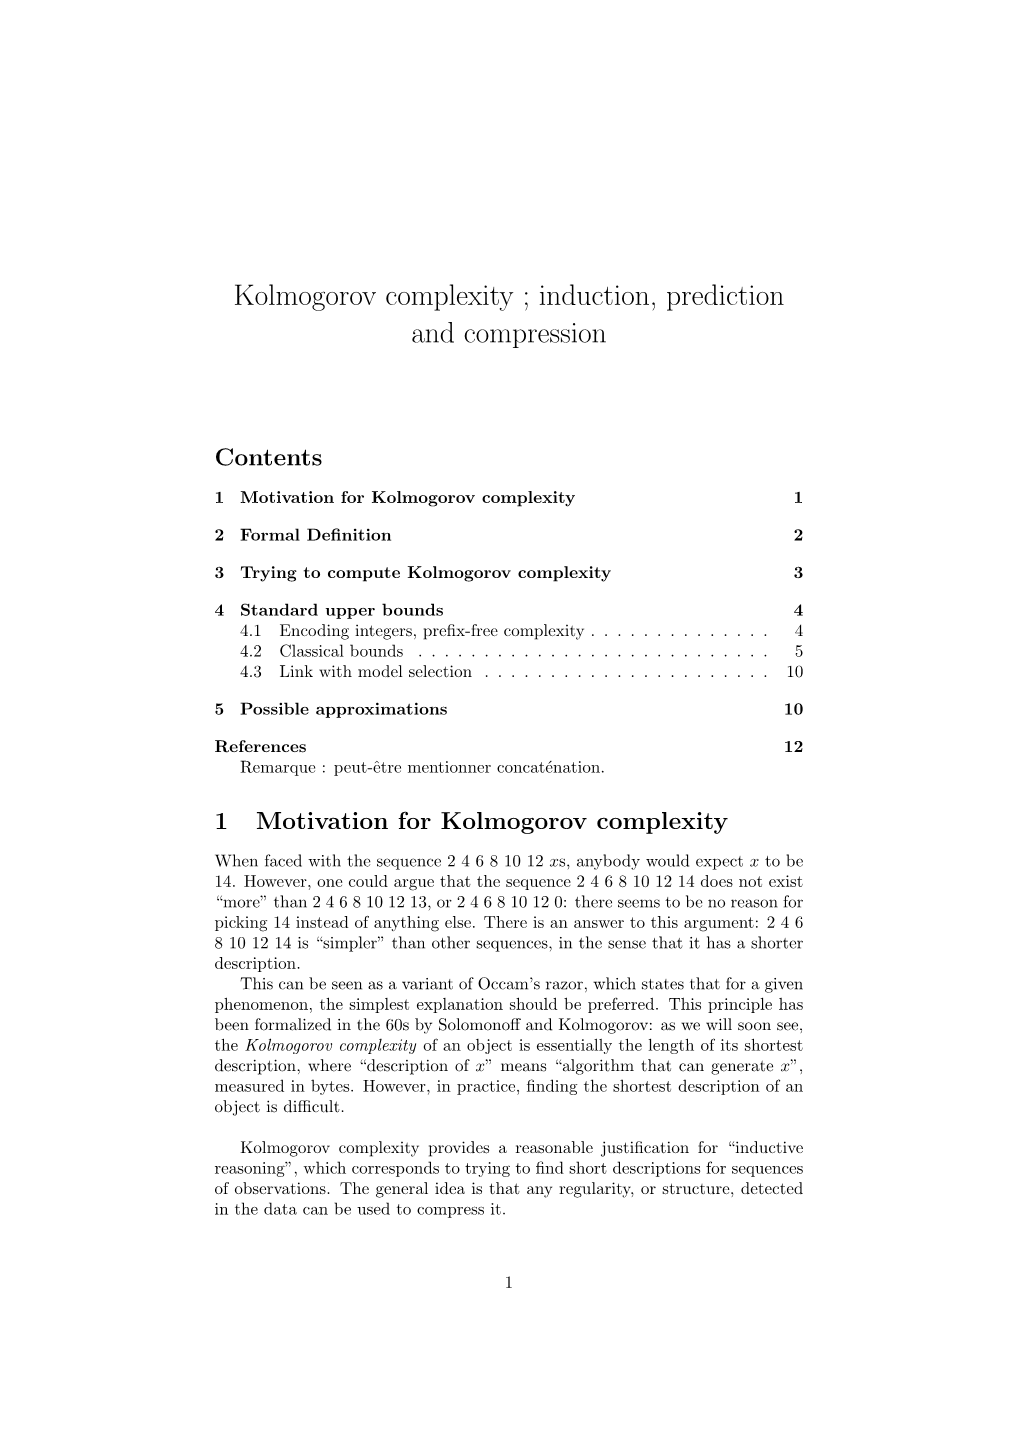 Kolmogorov Complexity ; Induction, Prediction and Compression